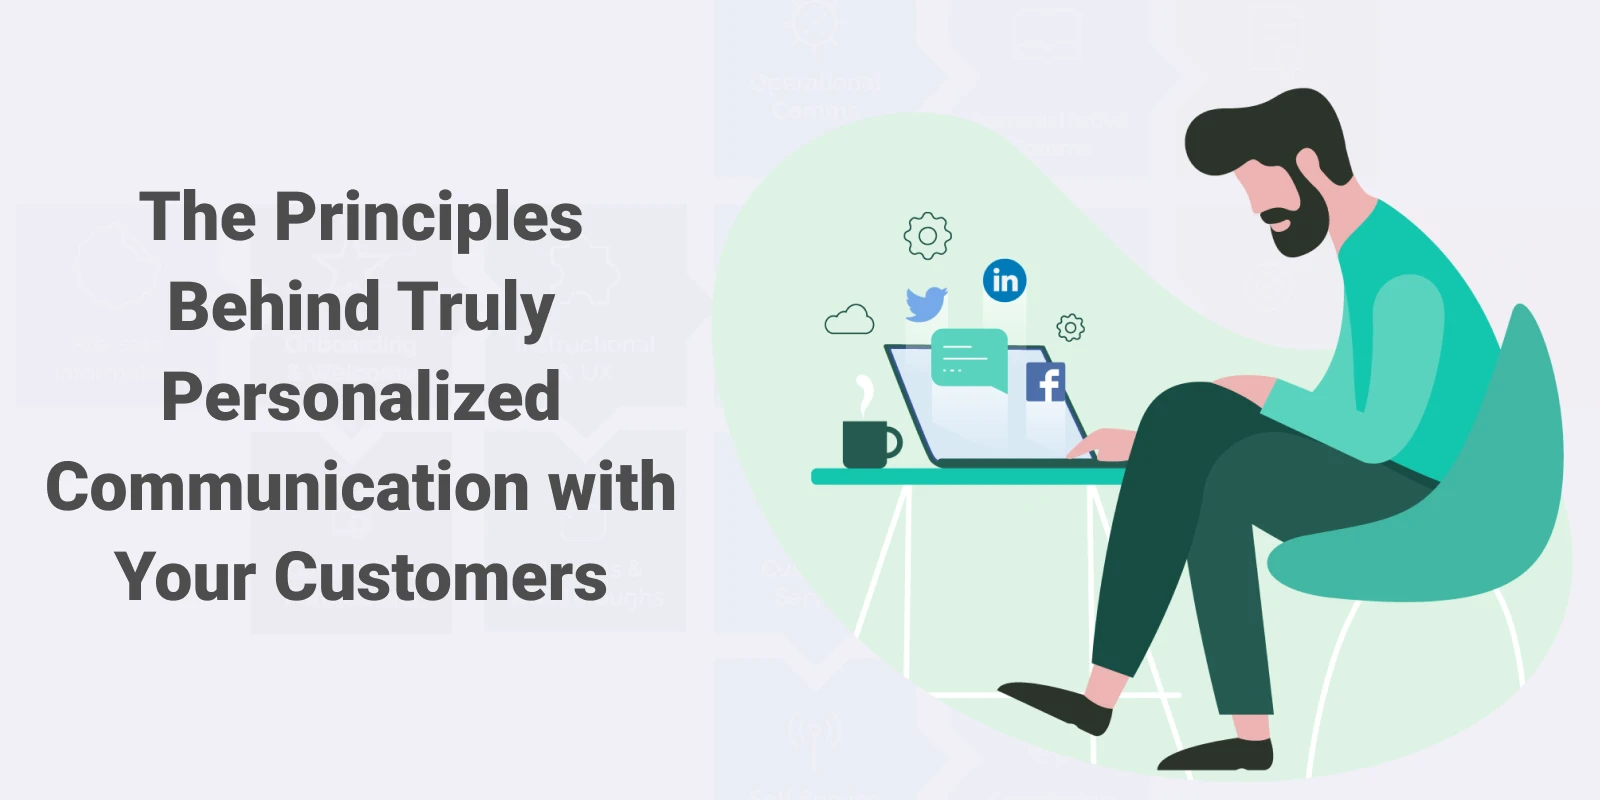 The principles behind truly personalized communication with your customer